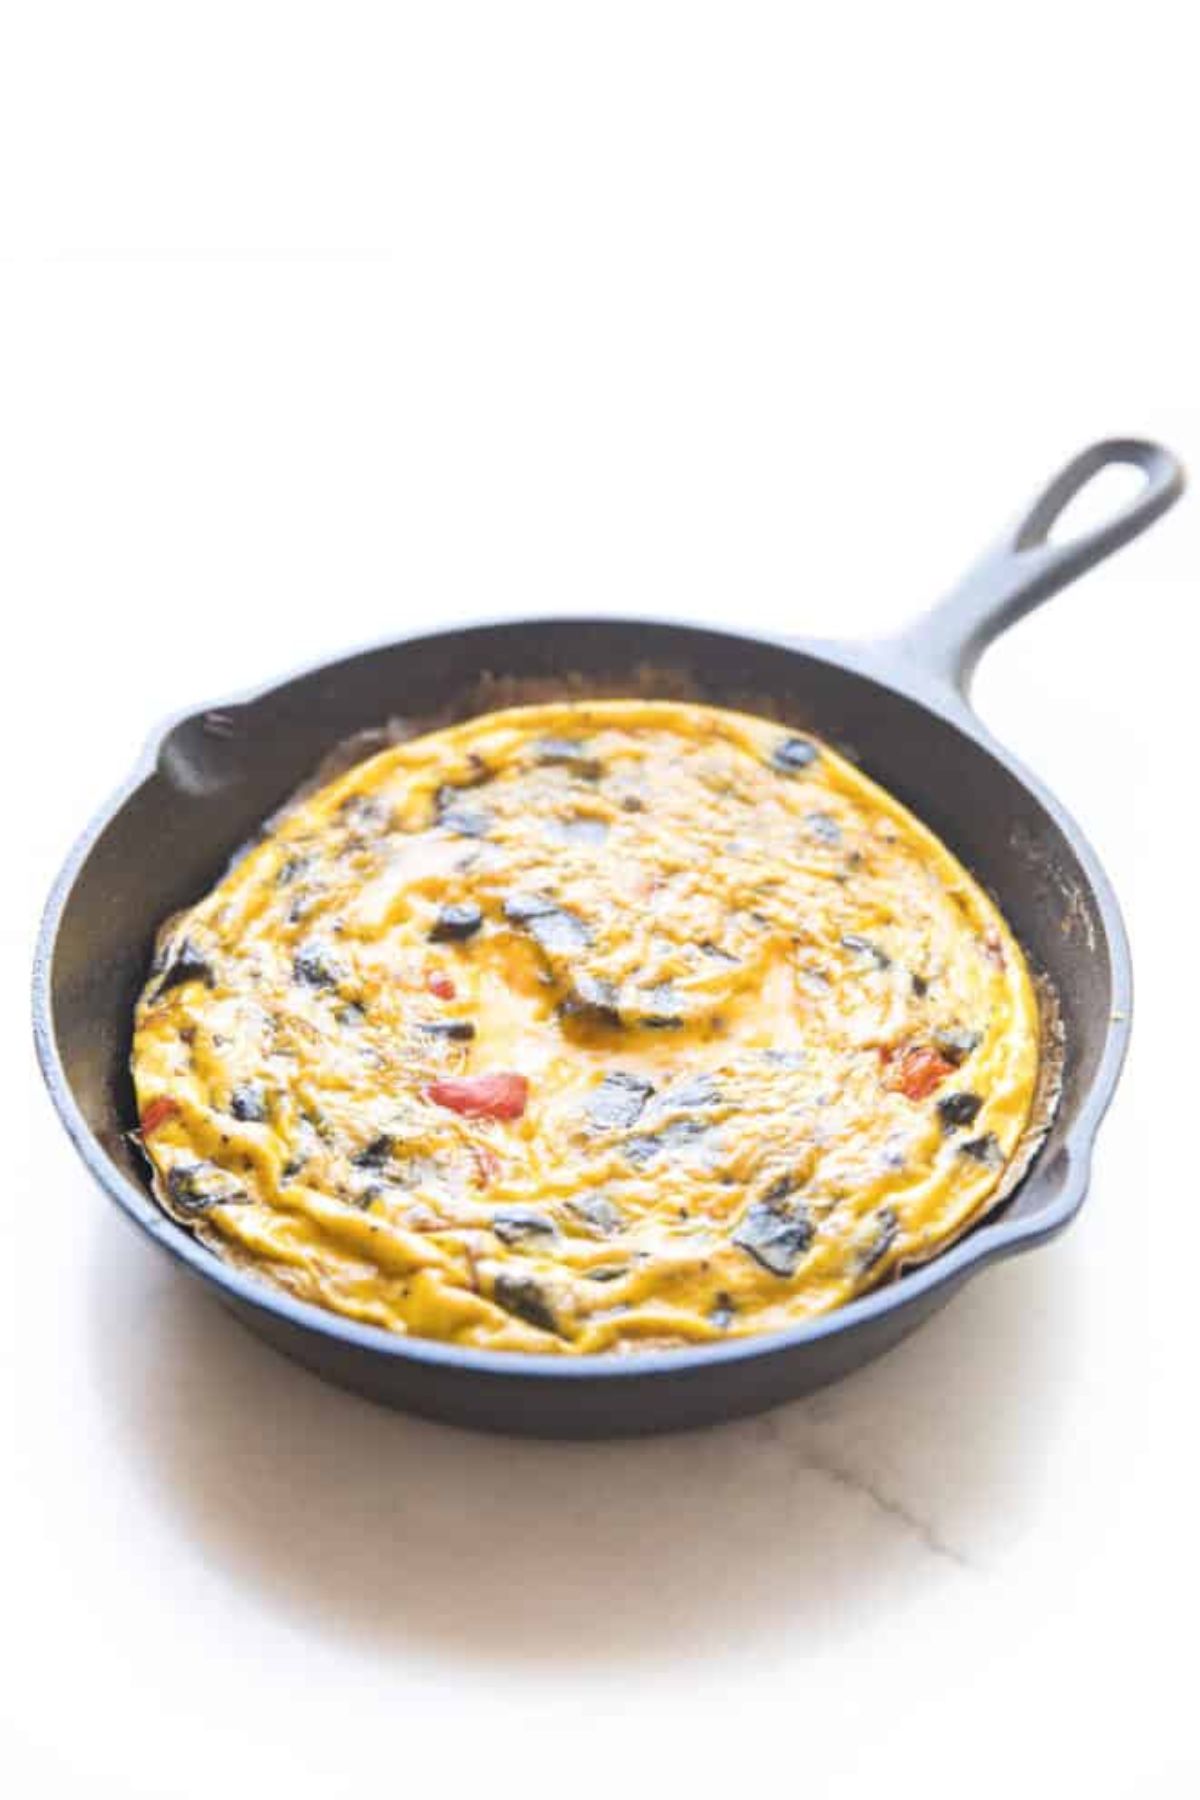 A frittata in a small cast iron pan